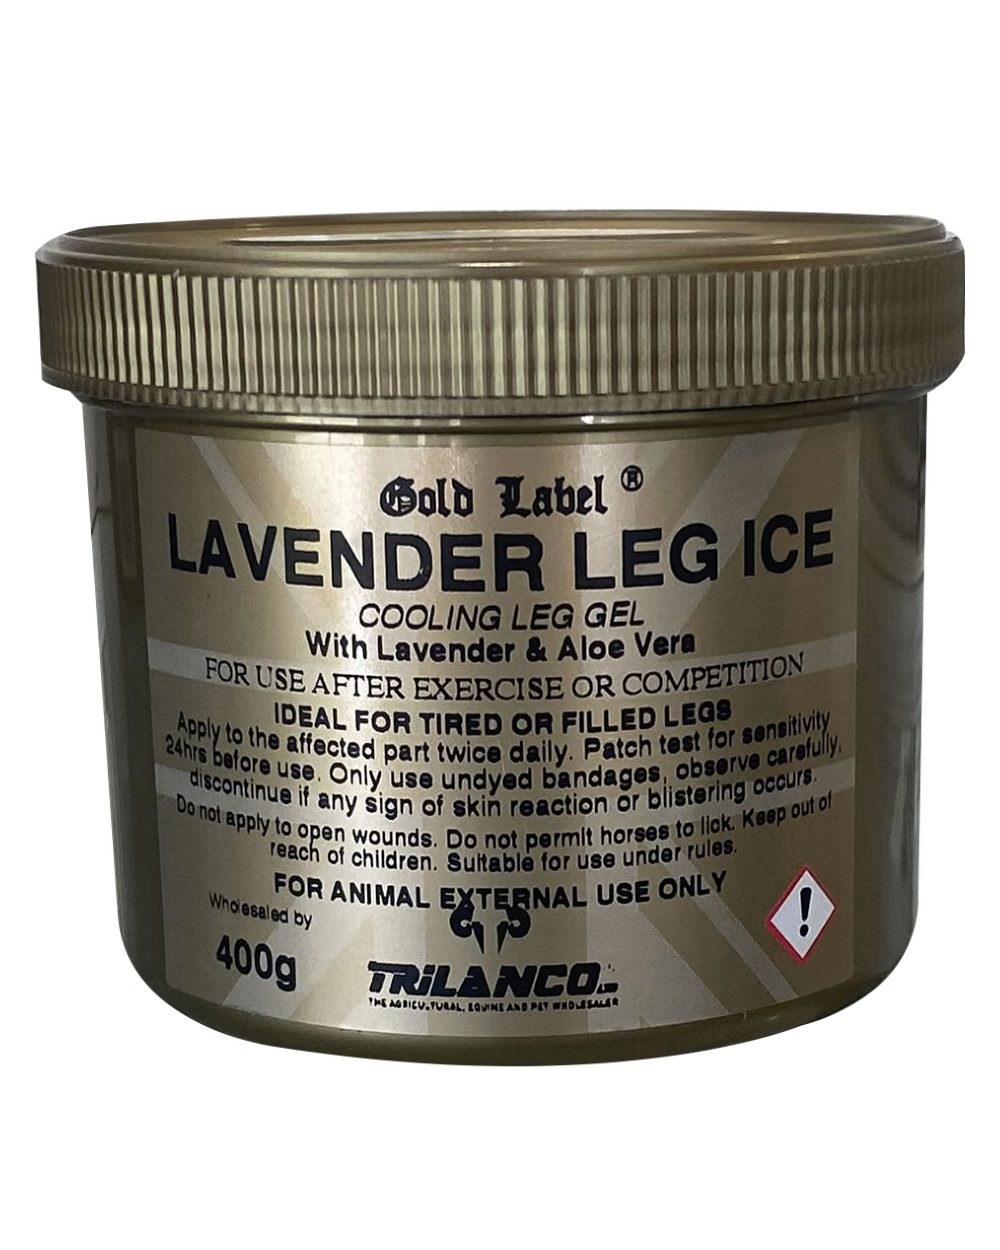 Gold Label Lavender Leg Ice On A White Background